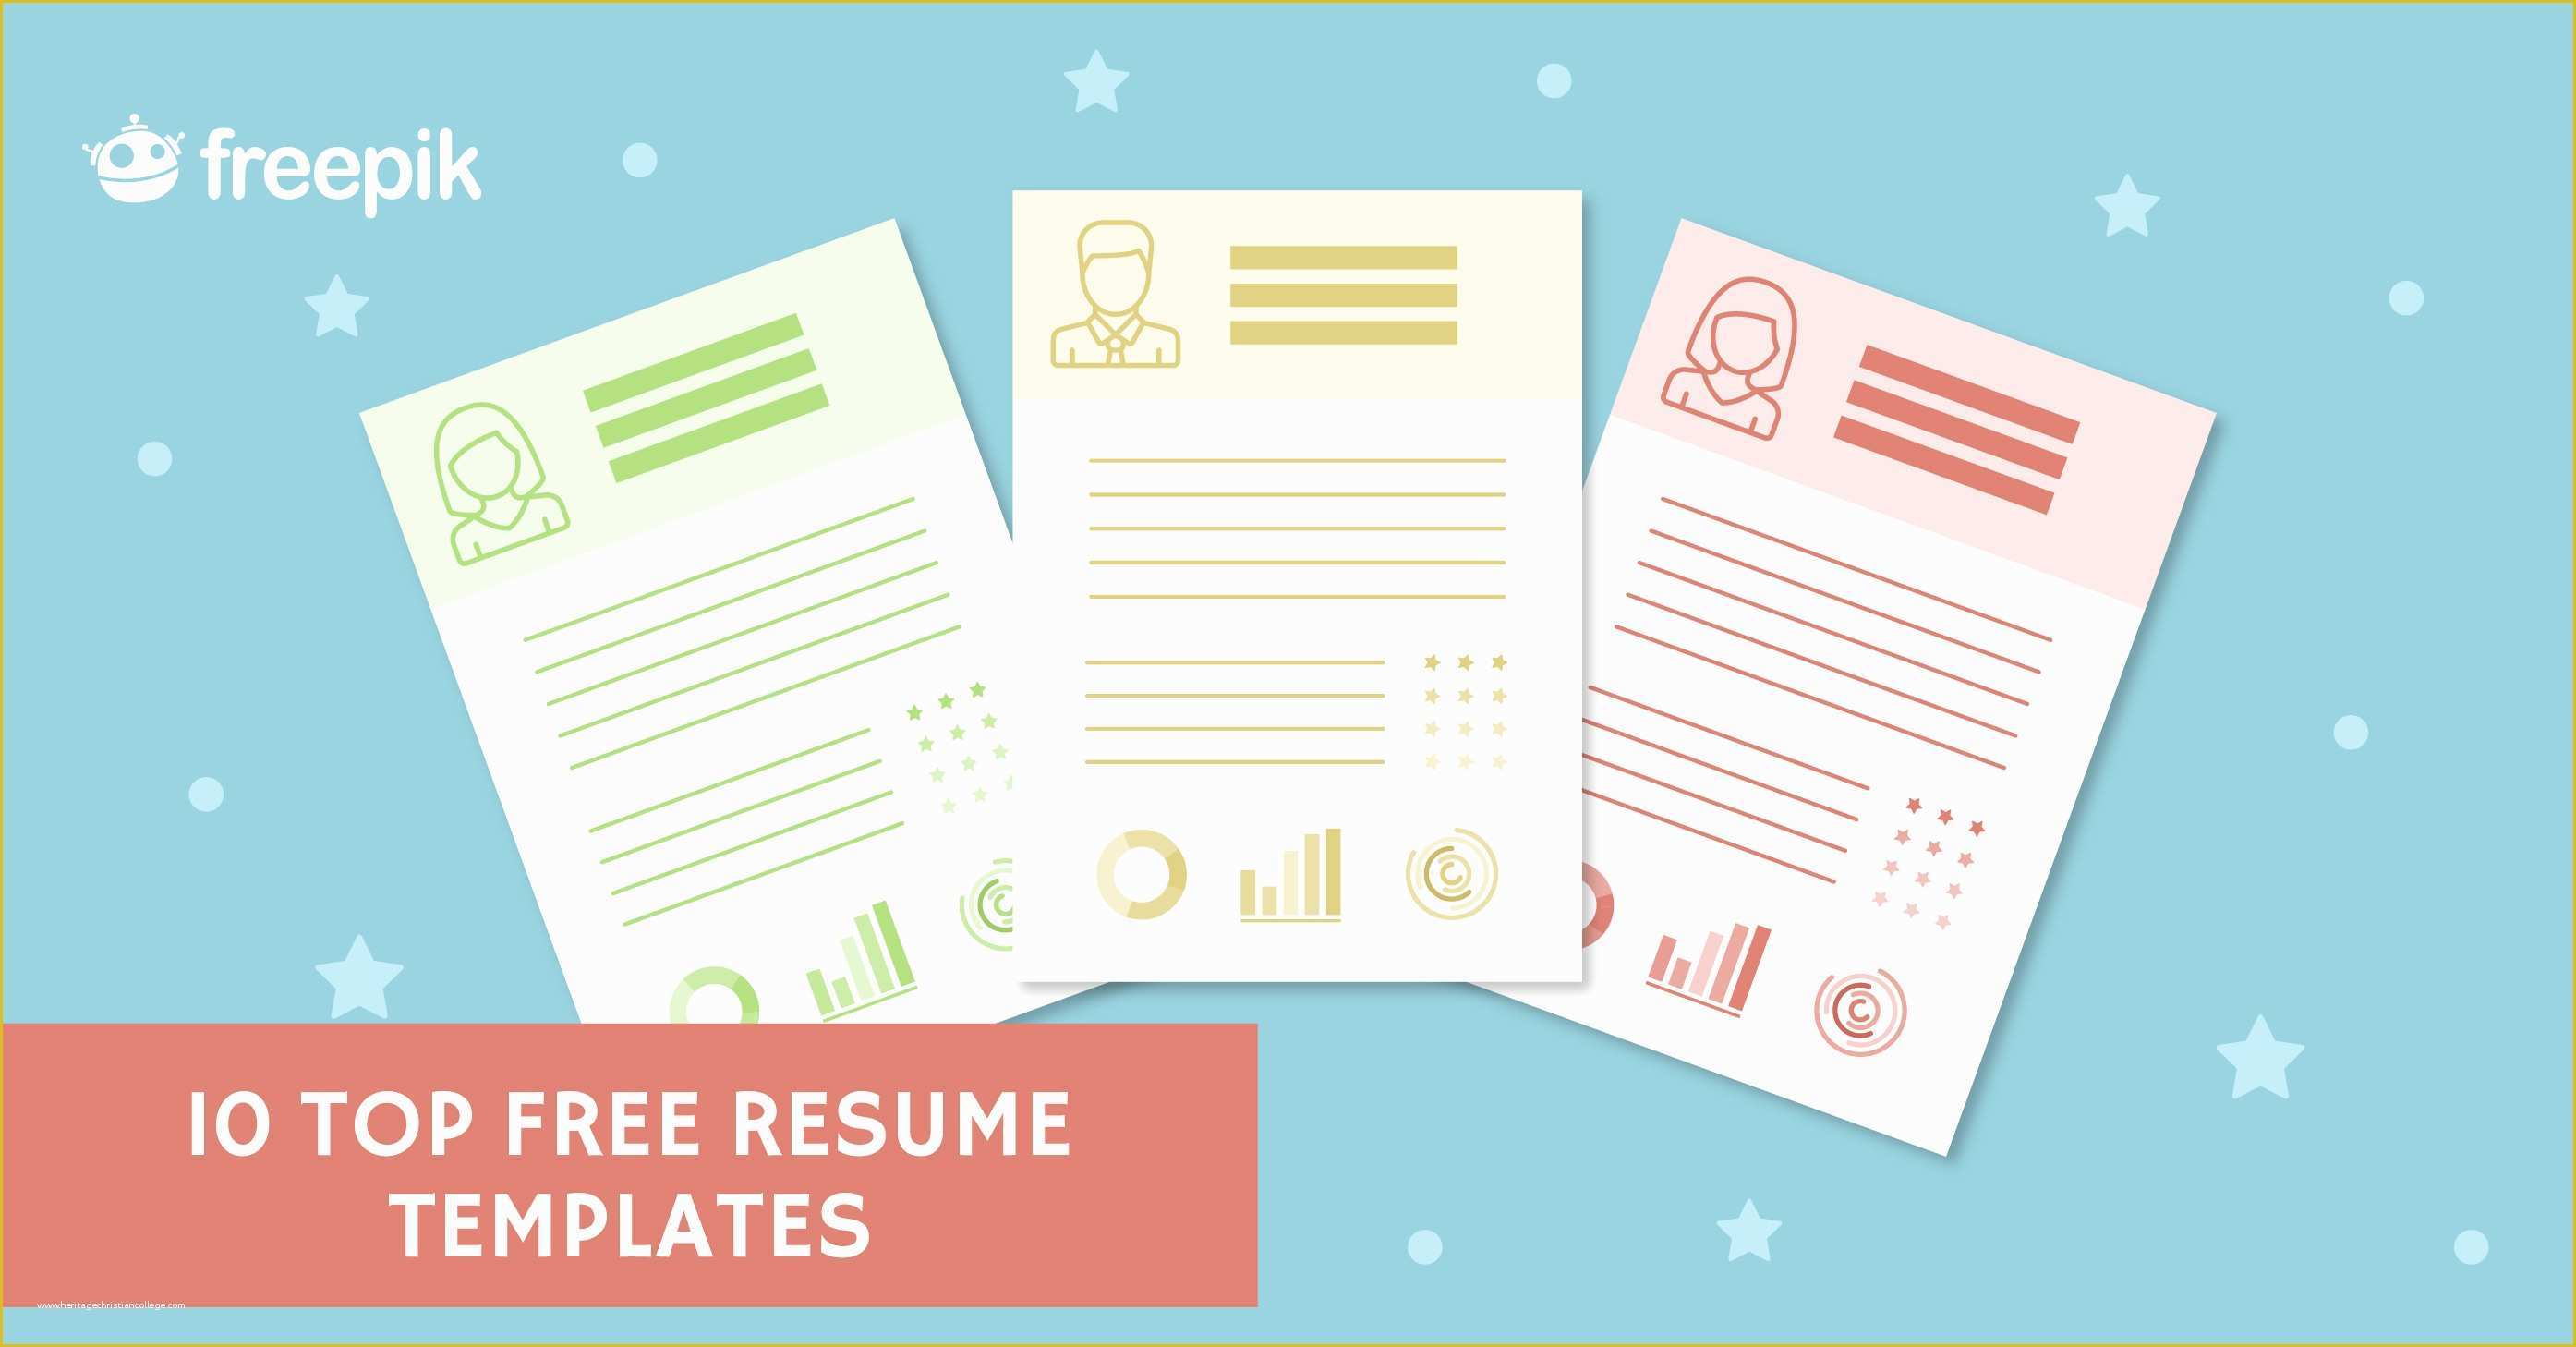 Top Free Resume Templates Of 10 top Free Resume Templates Freepik Blog Freepik Blog